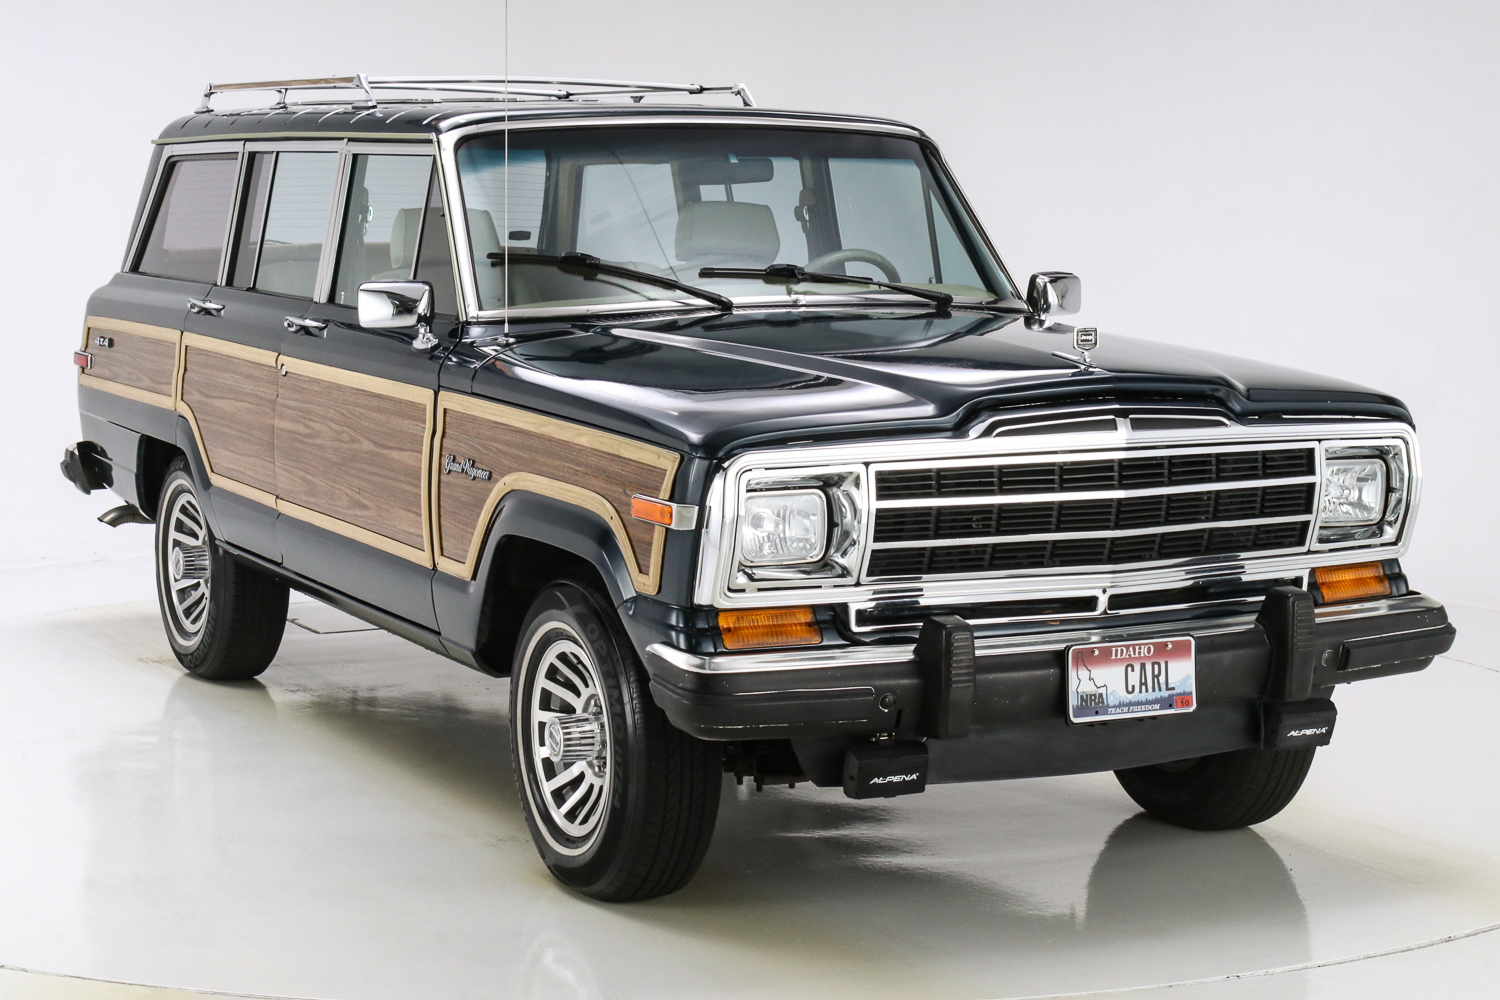 Used 1989 Jeep Grand Wagoneer Review